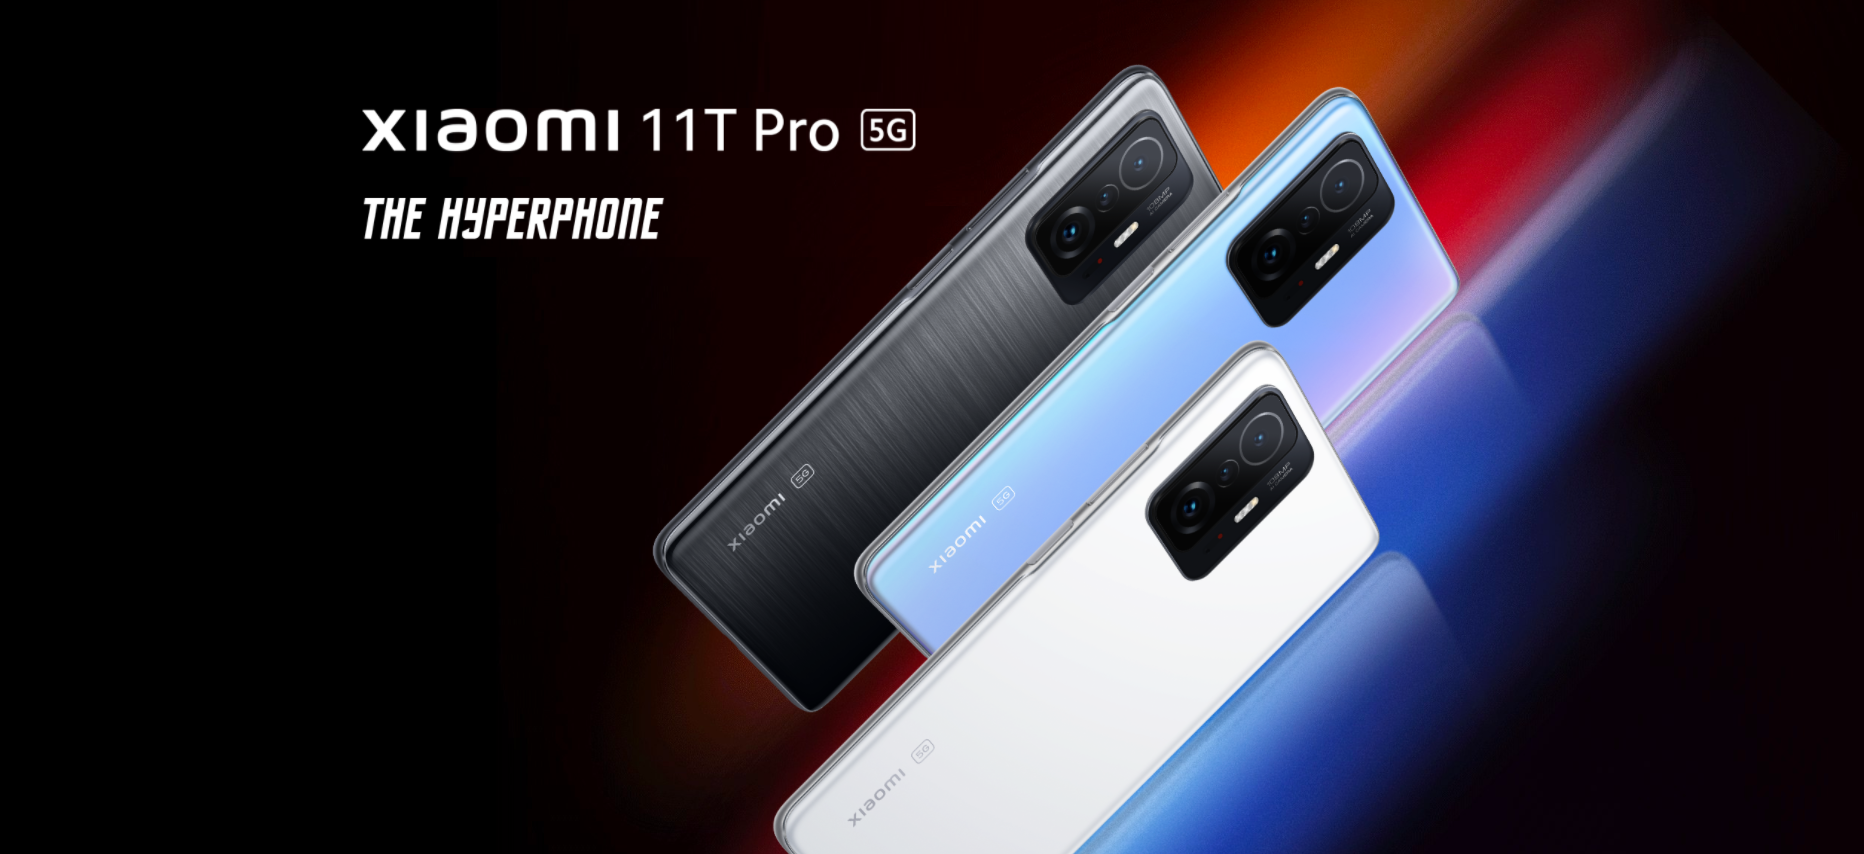 Xiaomi 11T Pro Hyperphone - Snapdragon 888, 120Hz display, 120W charging and 108MP camera at a very low price